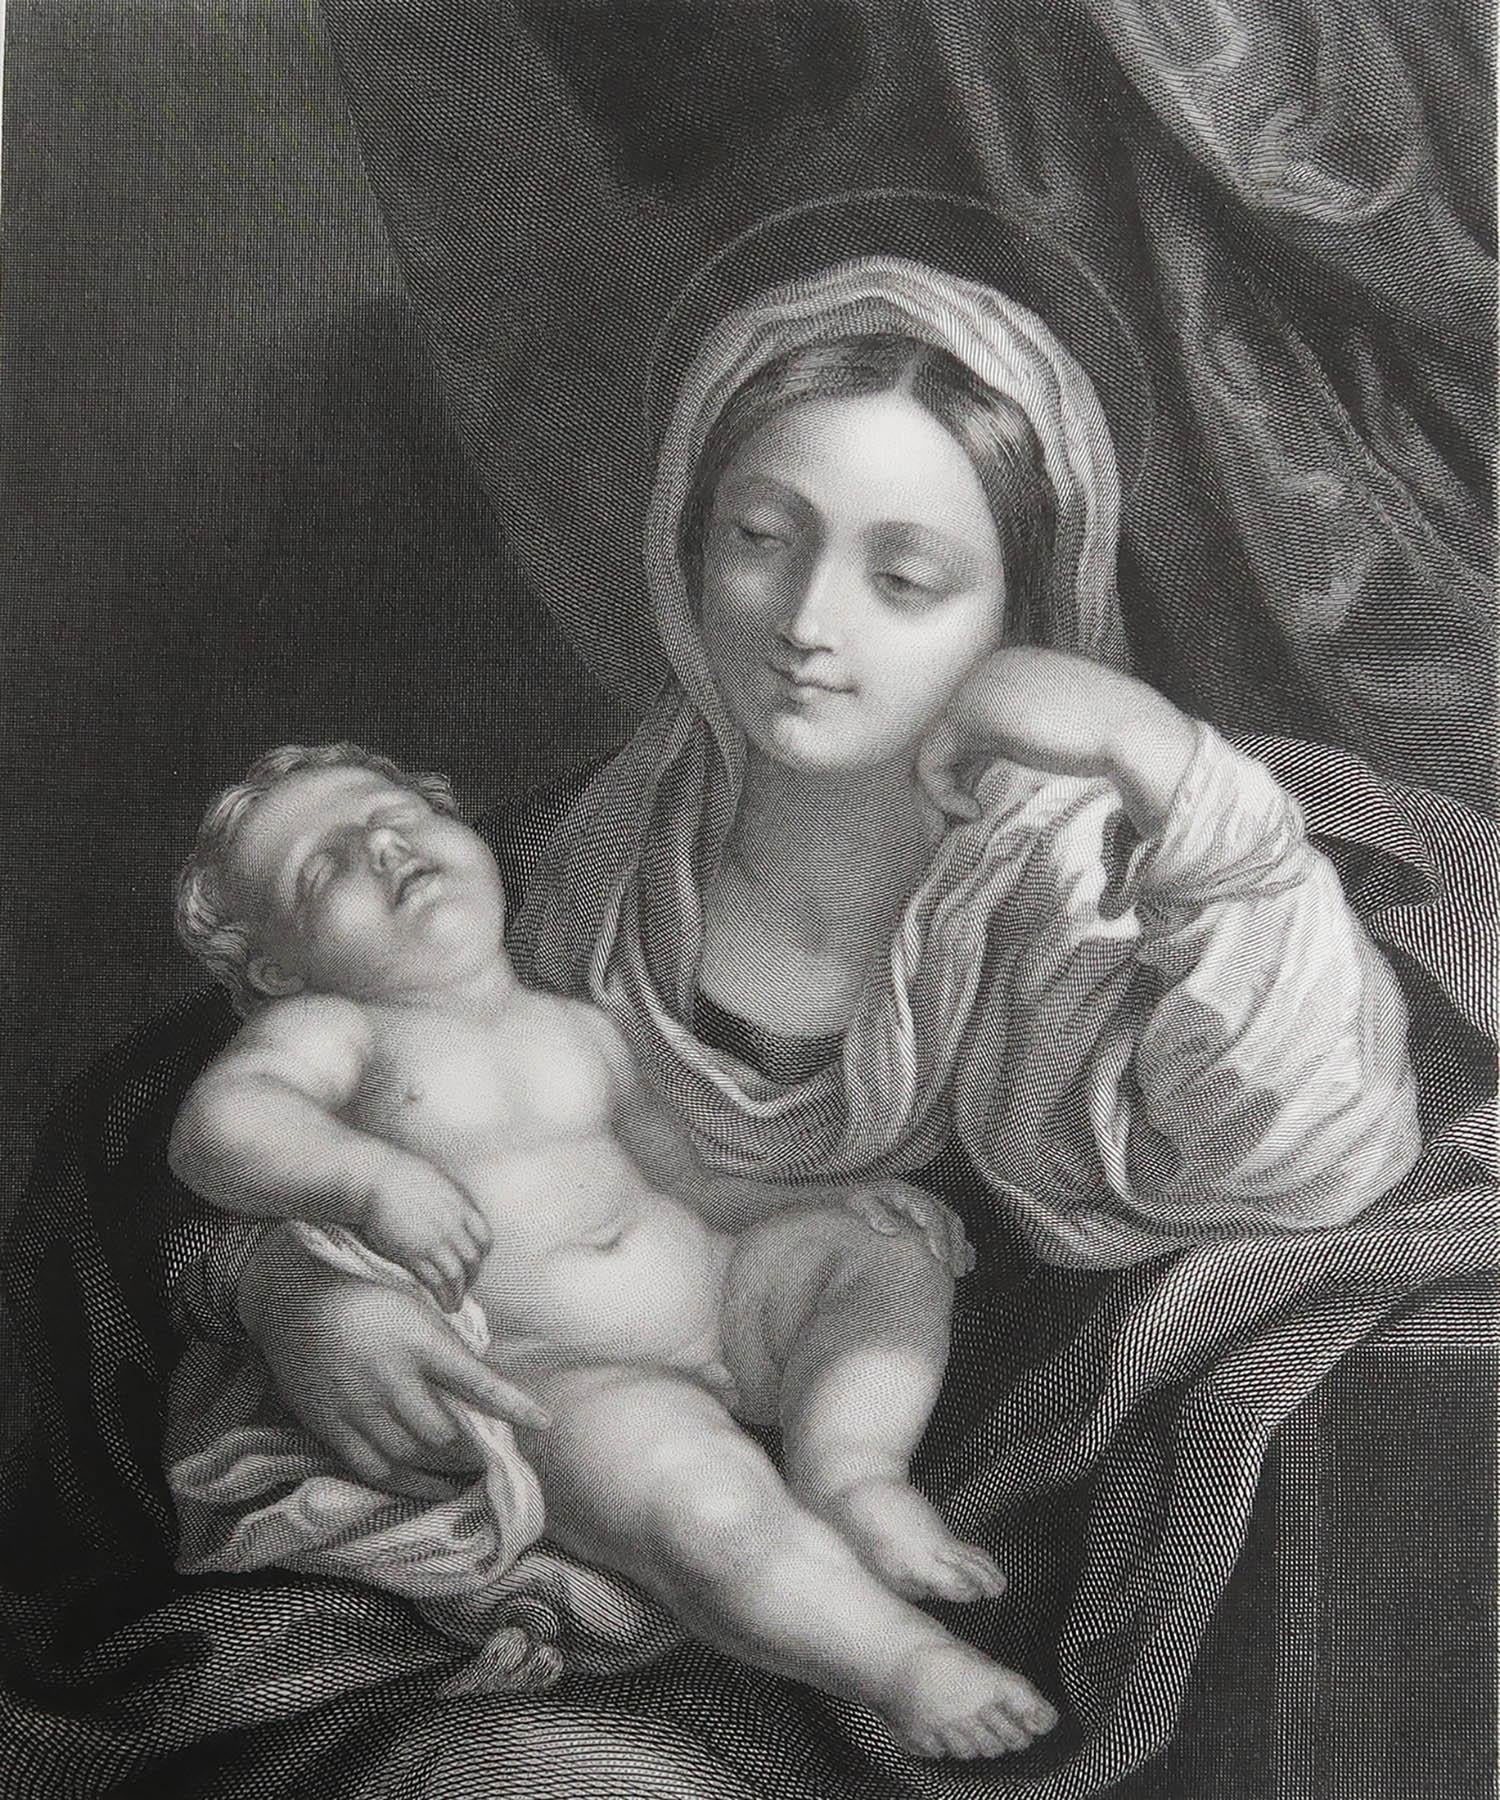 Wonderful image of the Virgin and Child

Fine Steel engraving 

Published by Virtue, London circa 1850

Unframed.

